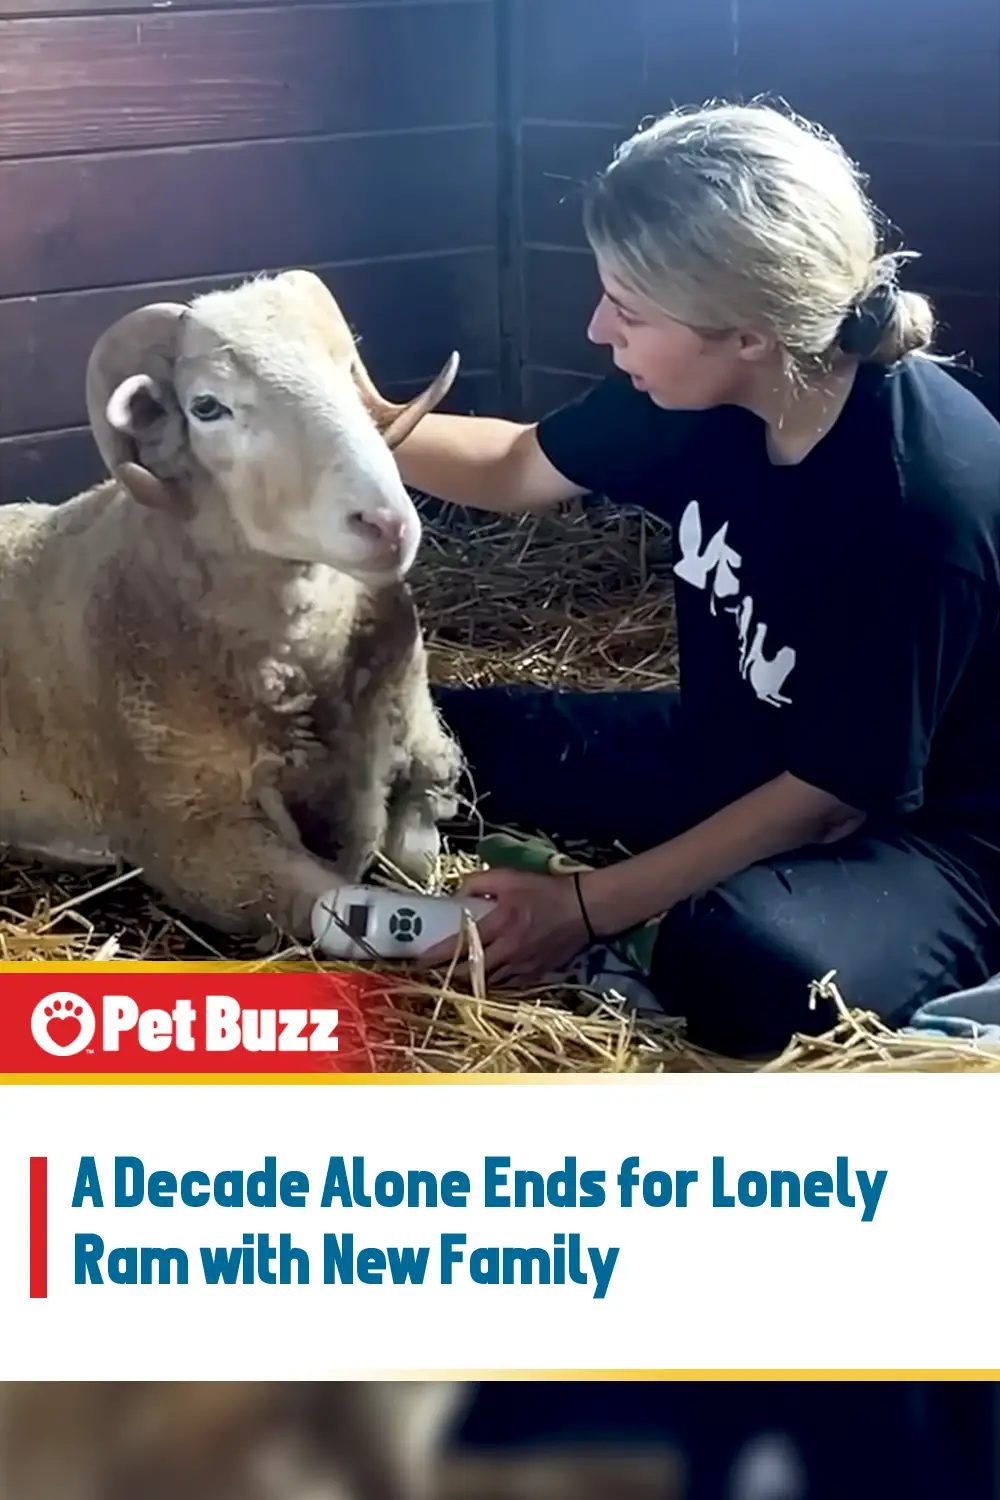 A Decade Alone Ends for Lonely Ram with New Family